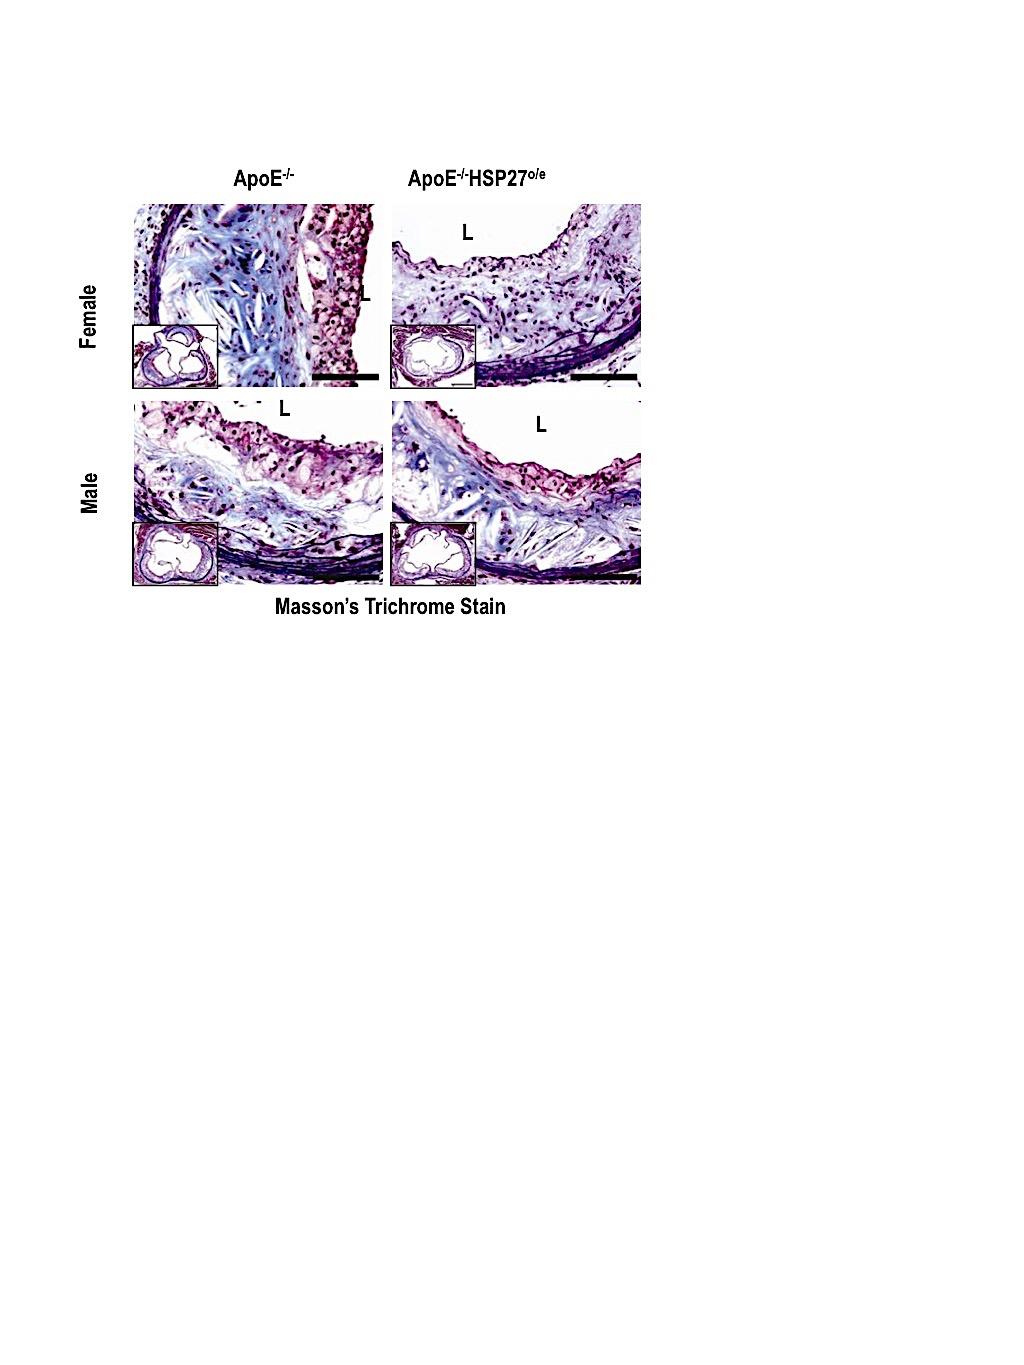 HSP27 Over-Expression Reduces Arterial